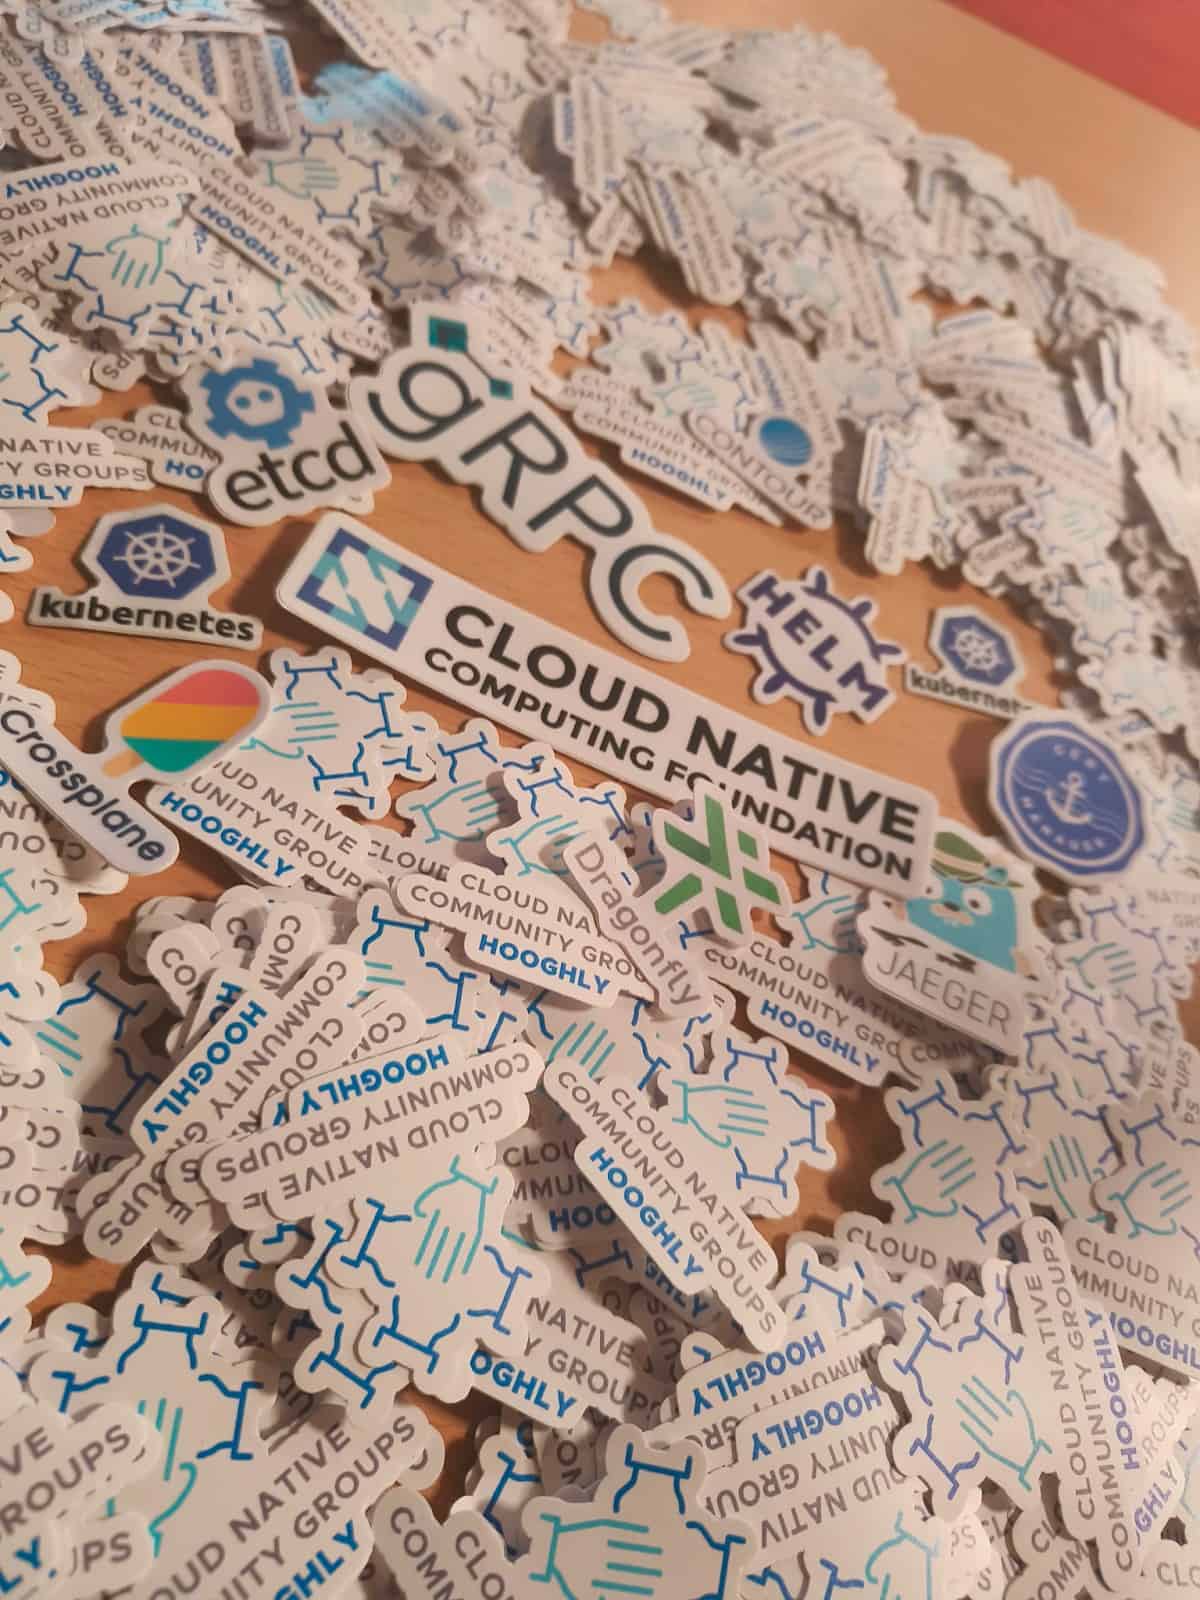 Cloud Native Computing Foundation stickers among other stickers